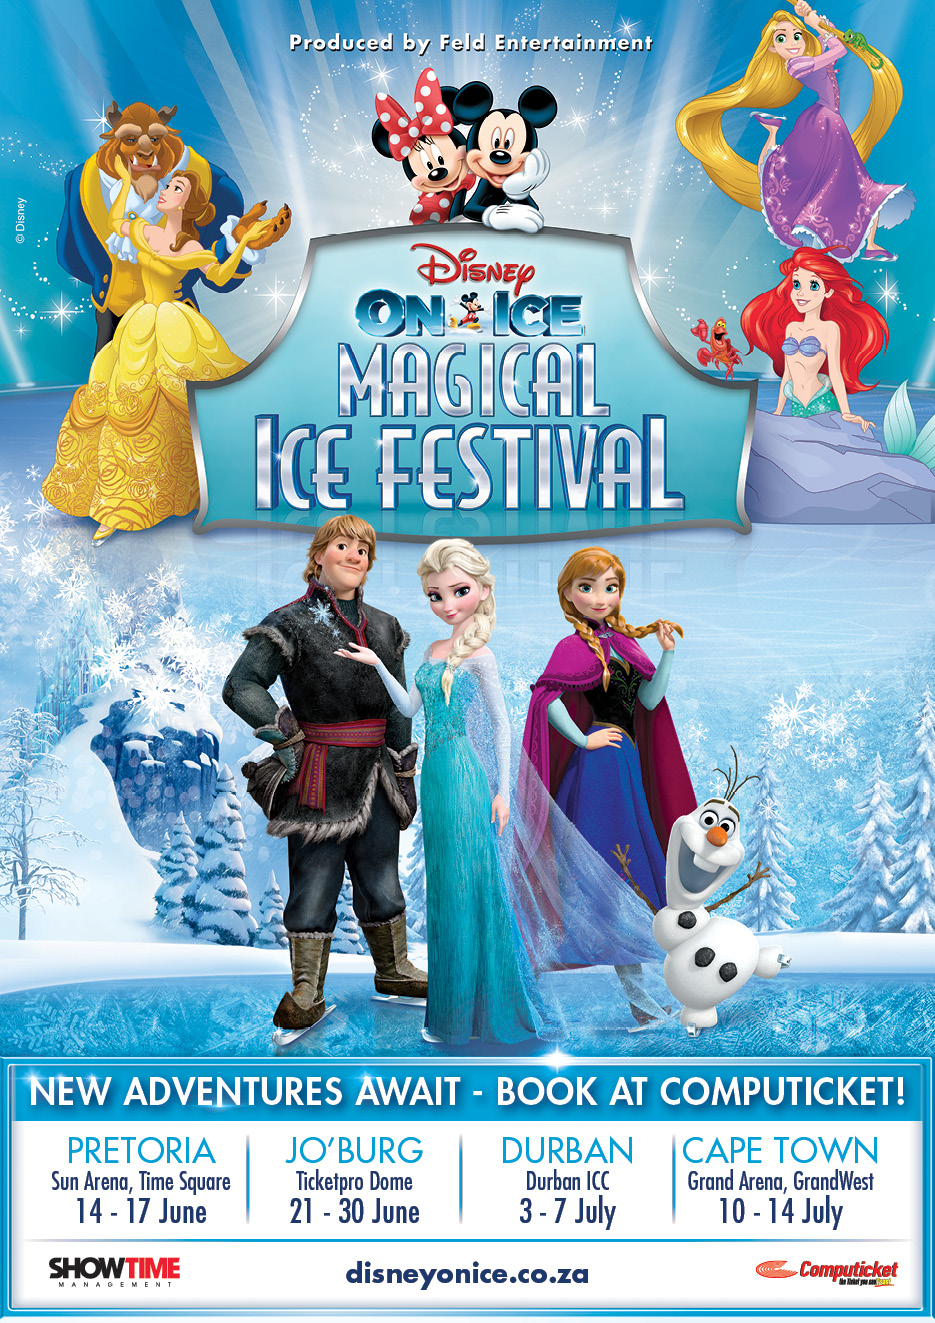 Win one set of 4 family tickets to Disney On Ice at Durban! Forts and